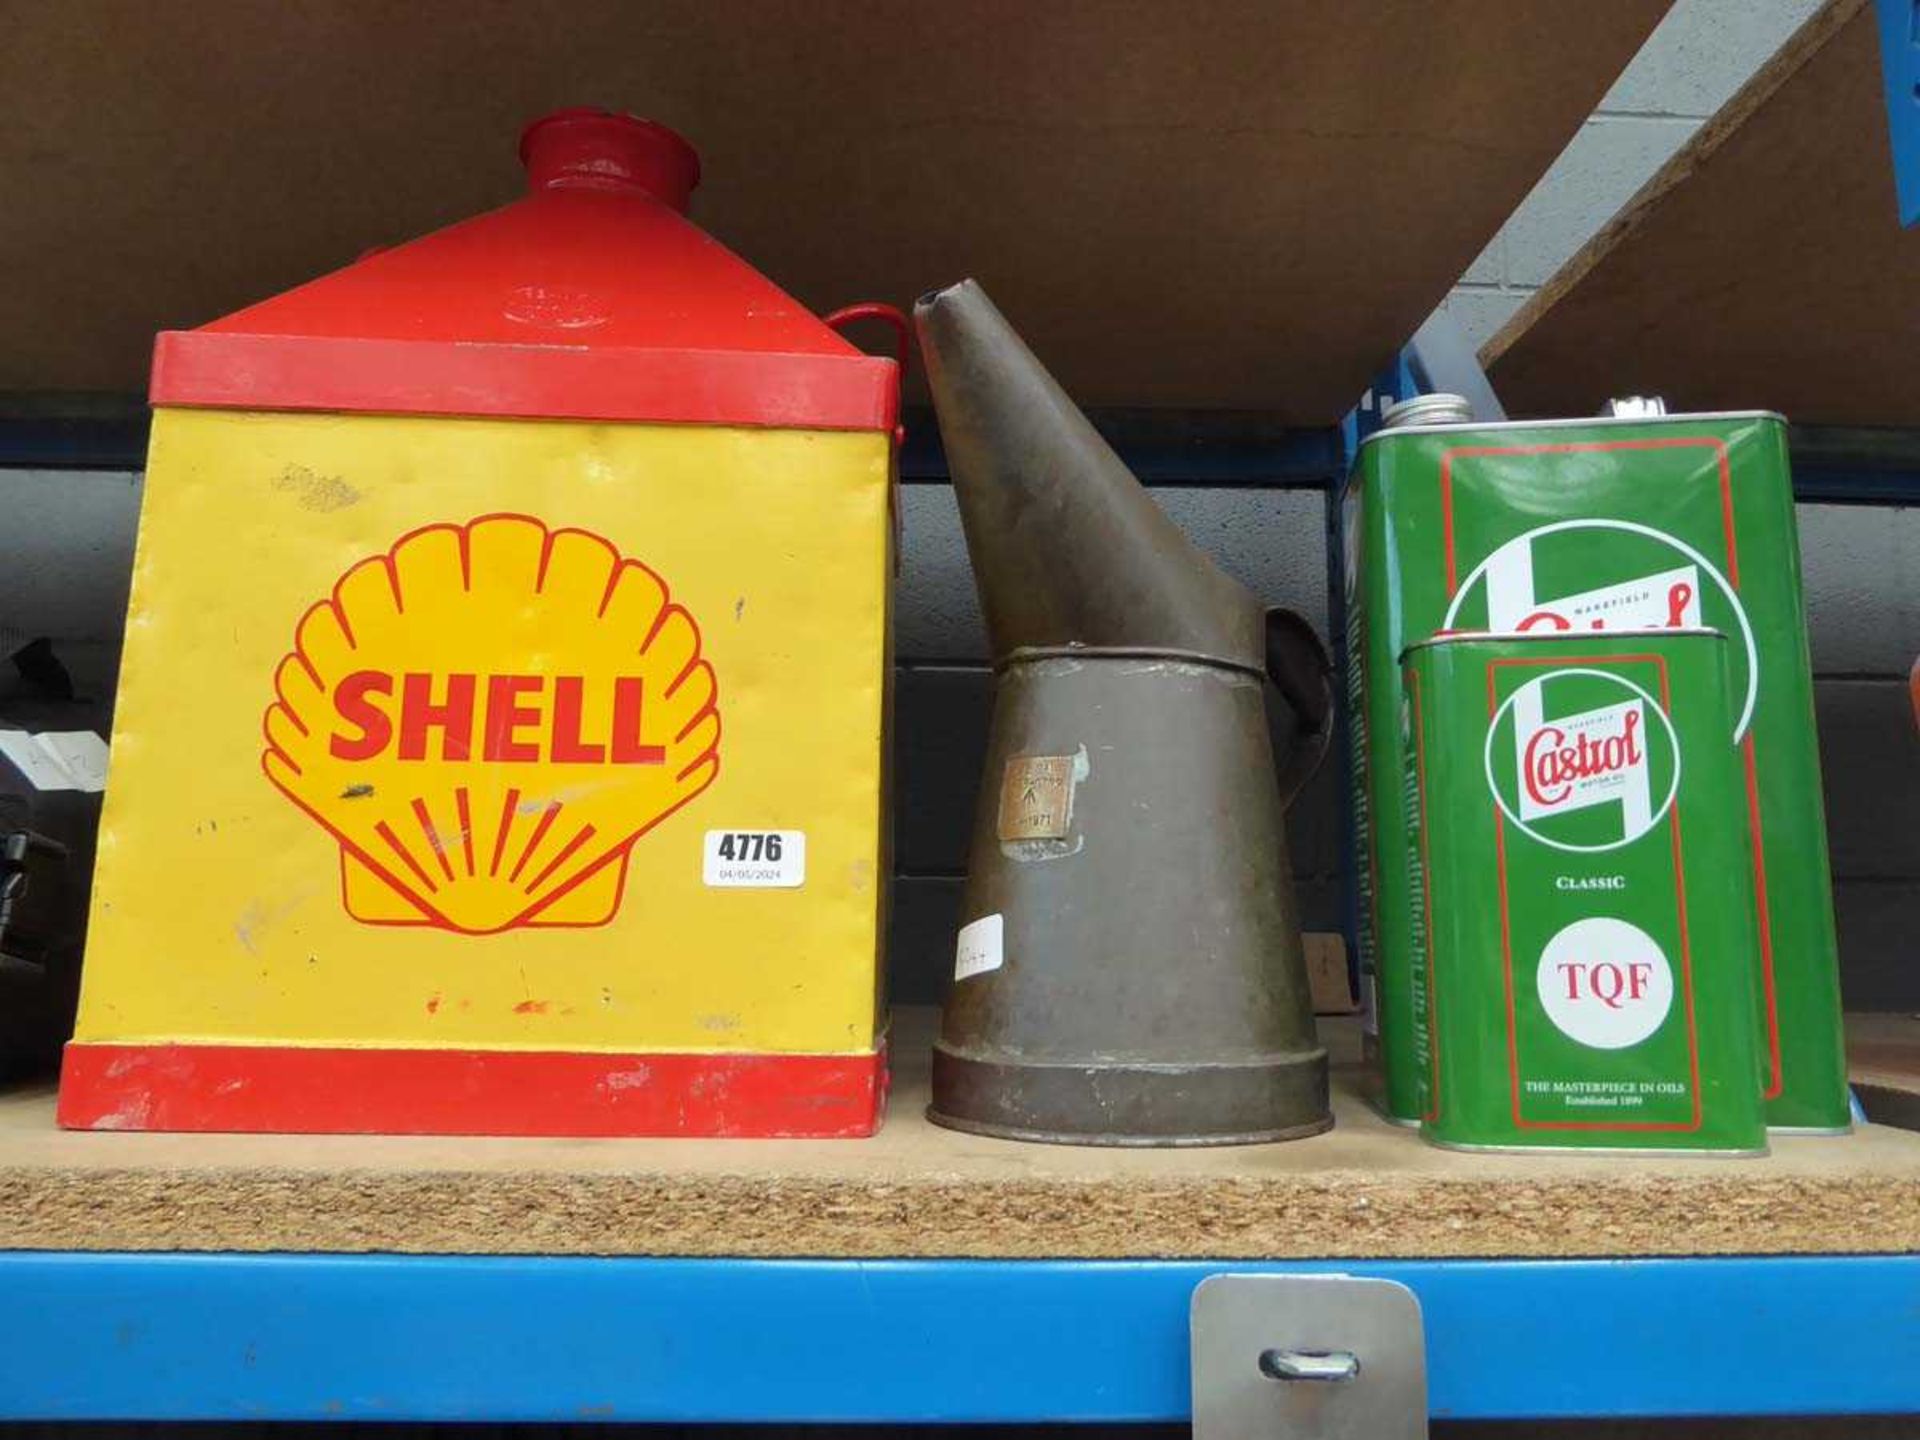 Vintage Shell fuel can, a oil can and 2 tins of Castrol oil